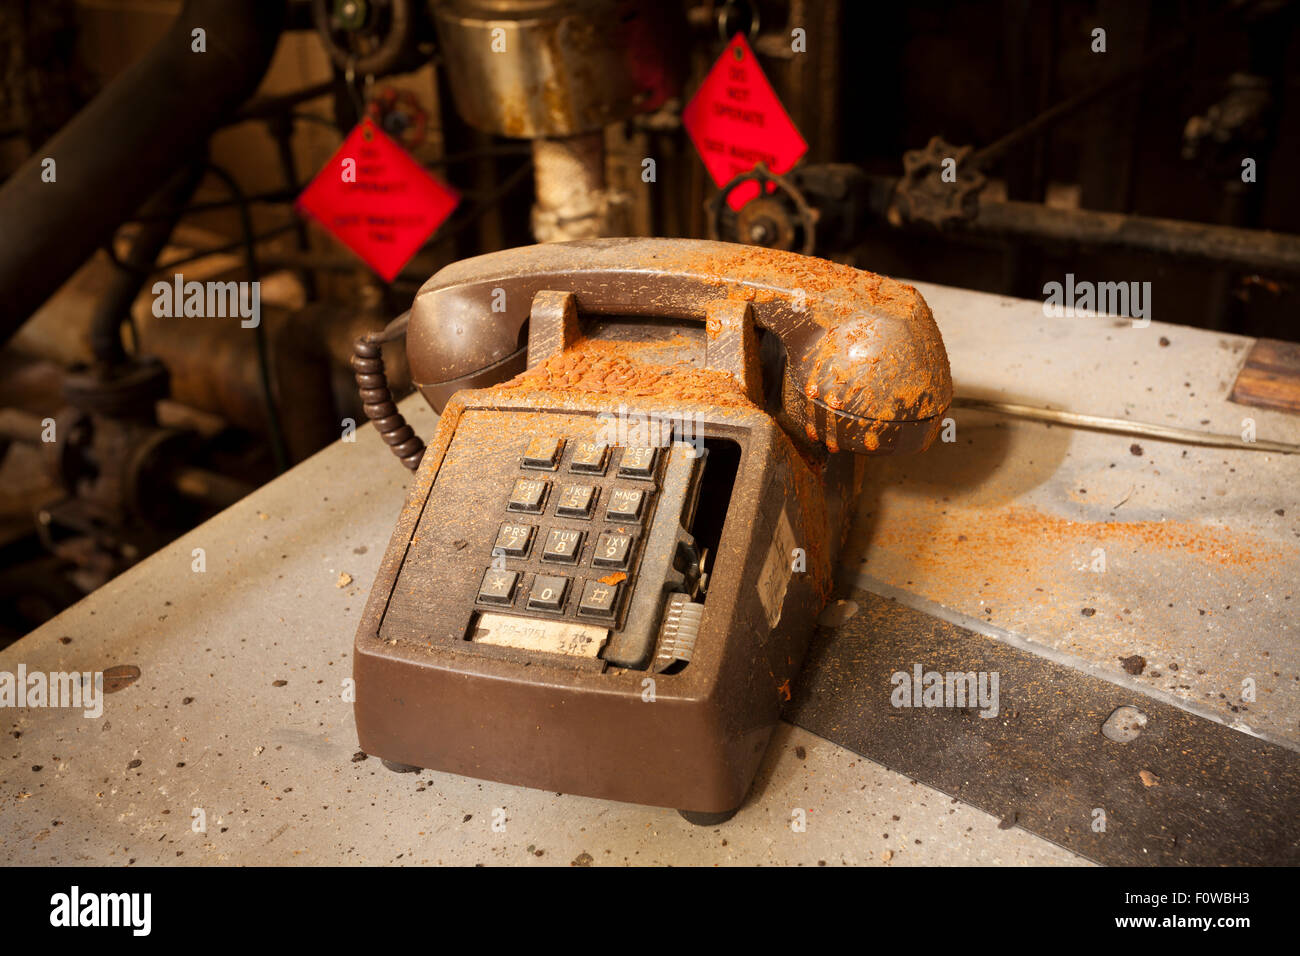 A filthy broken telephone covered in dust and industrial chemicals. Stock Photo